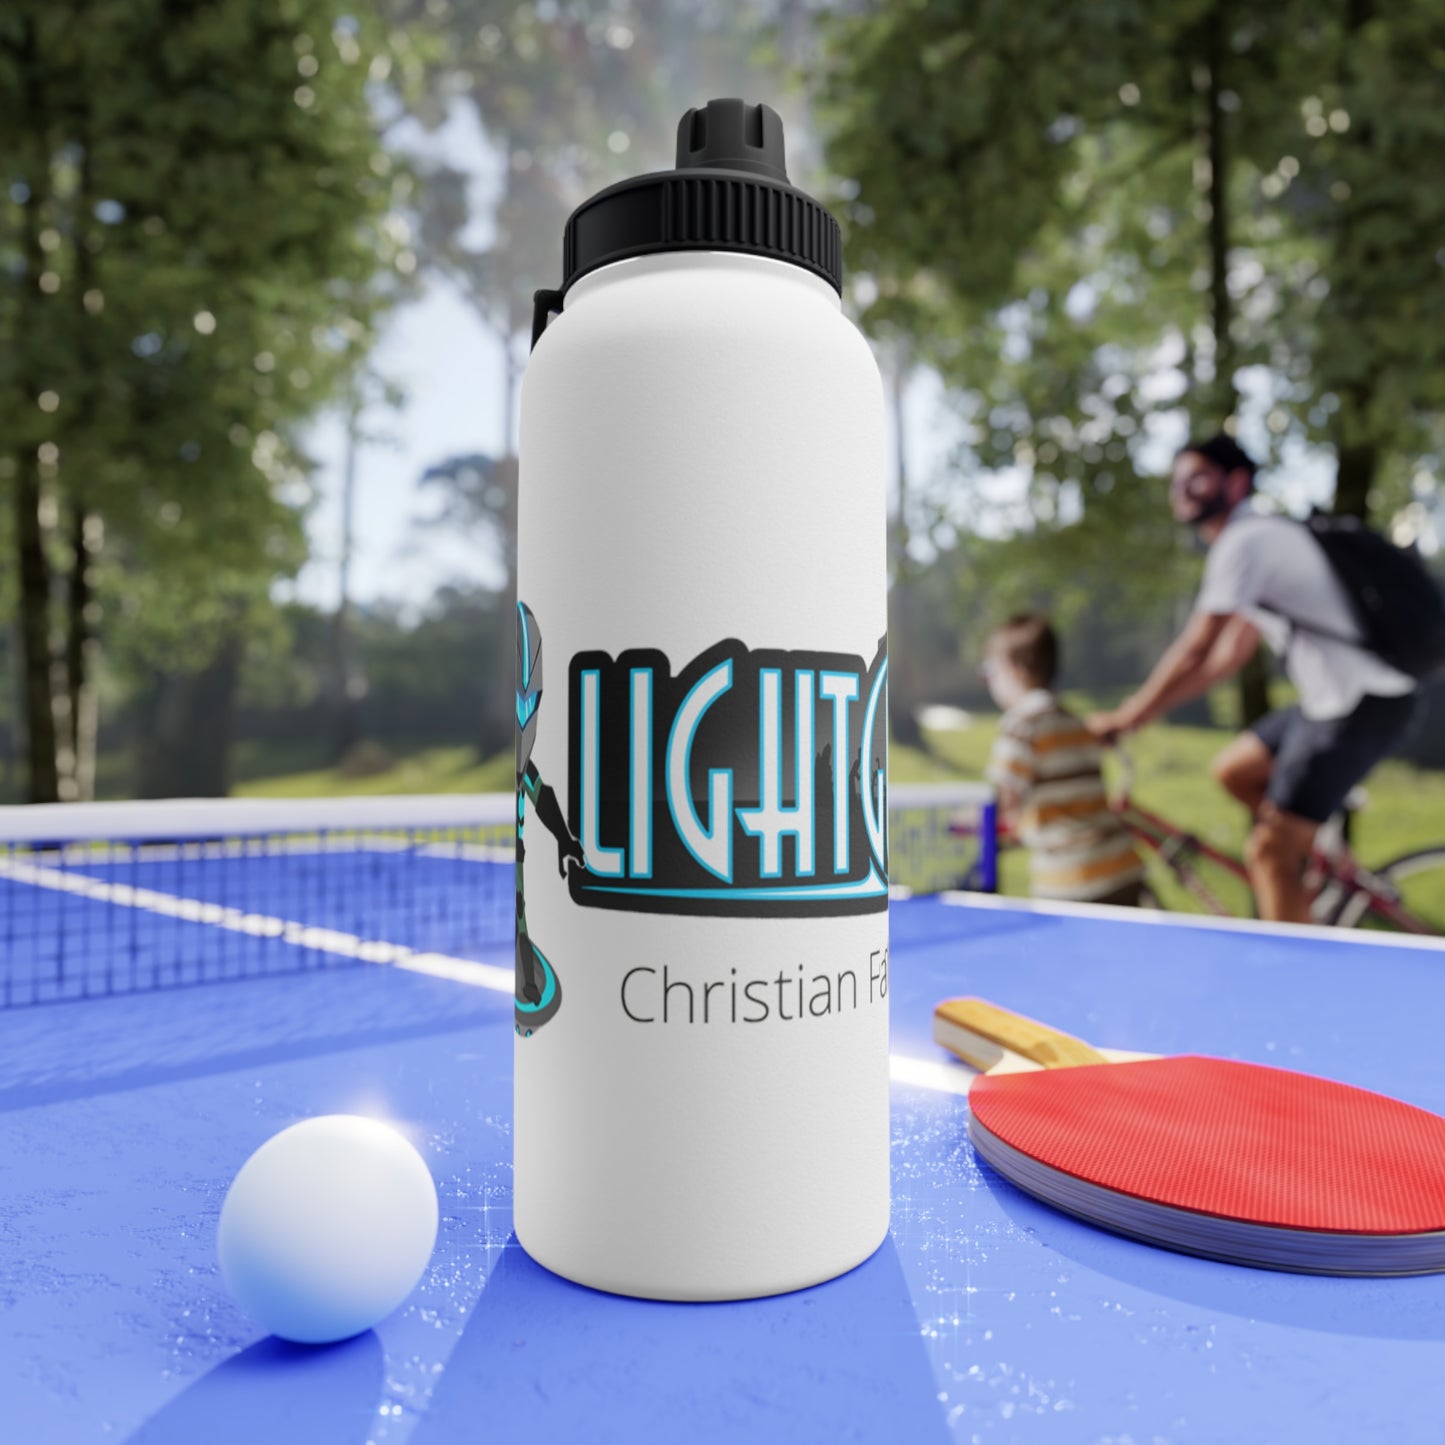 Water Bottle - Stainless Steal, Sports Lid